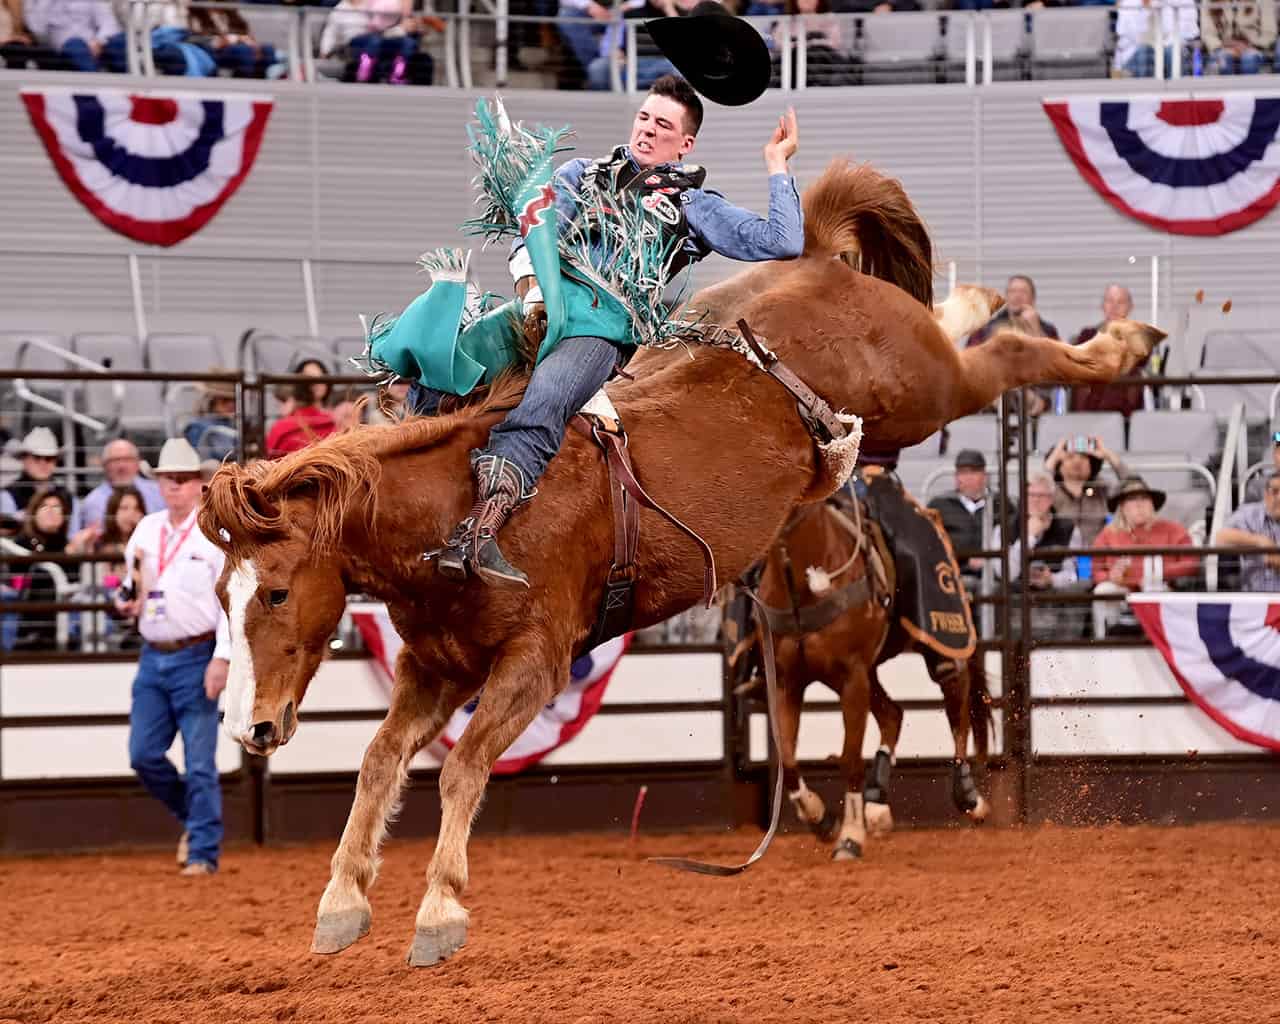 What Is The Prize Money Like For Texas Rodeo Winners?